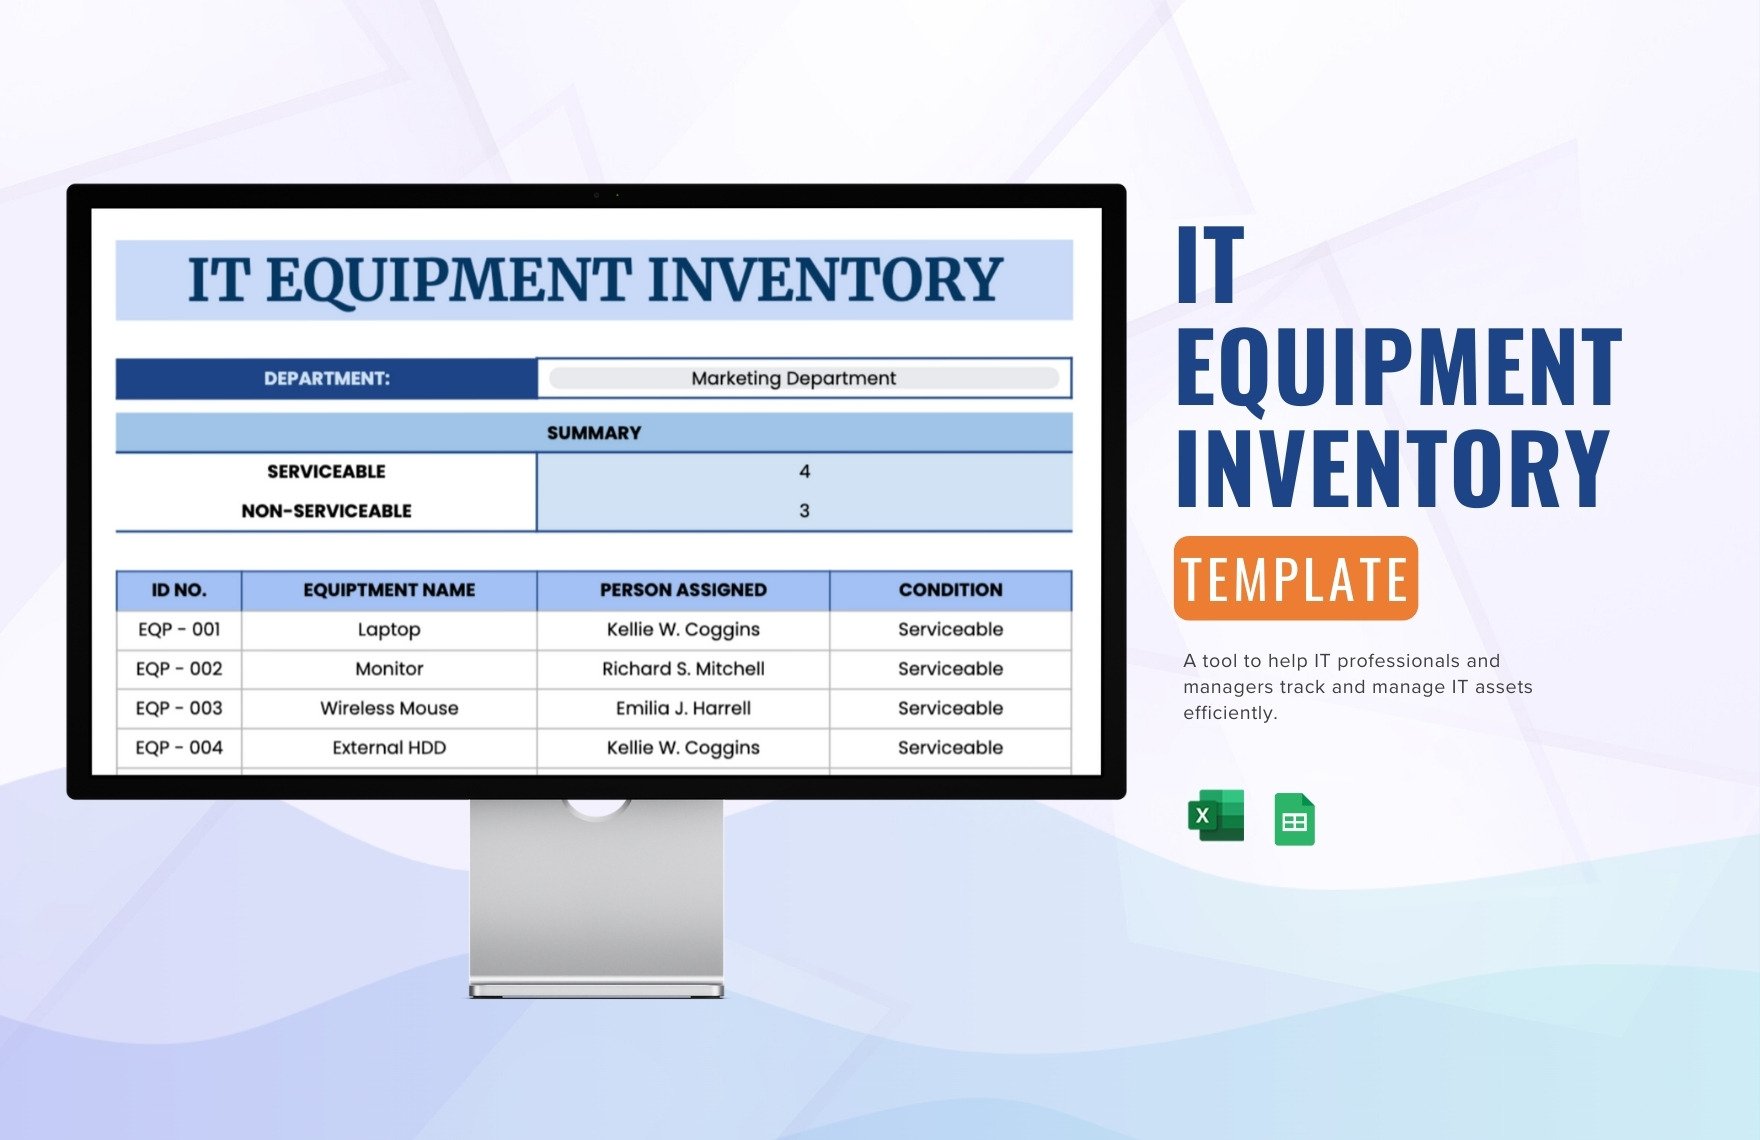 IT Equipment Inventory Template